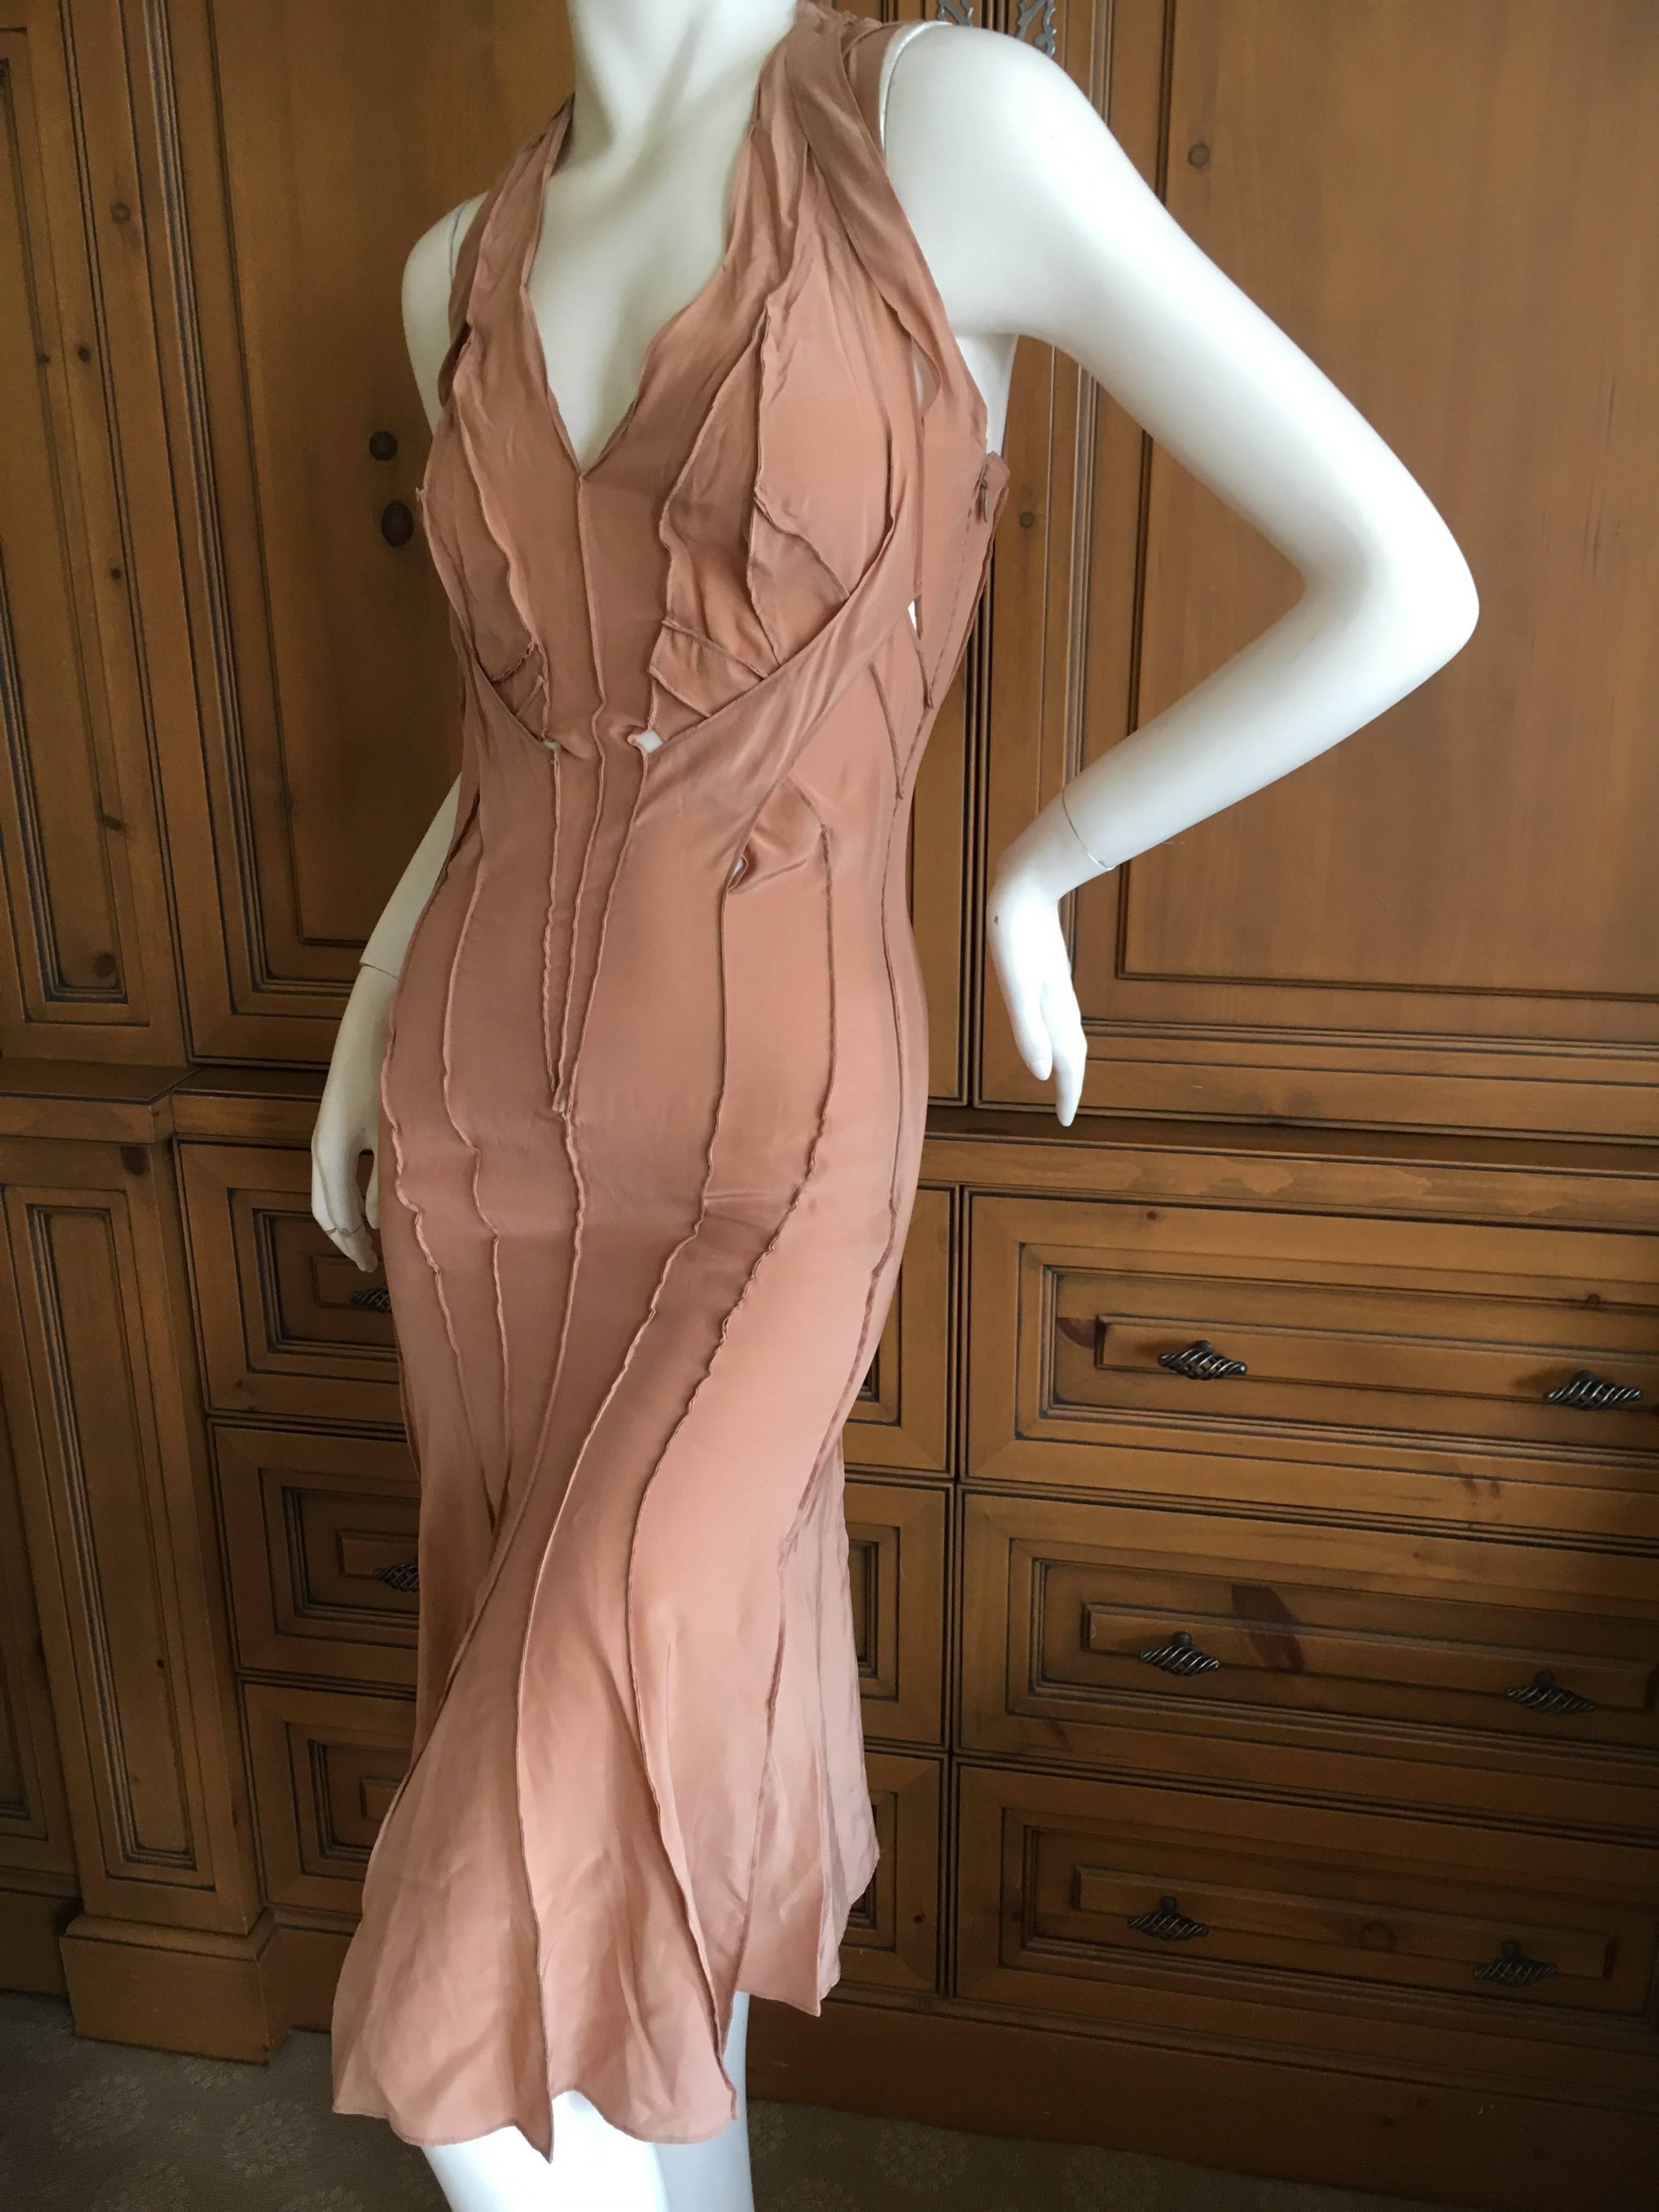 Yves Saint Laurent by Tom Ford 2002 Silk Dress Size 36 For Sale 2